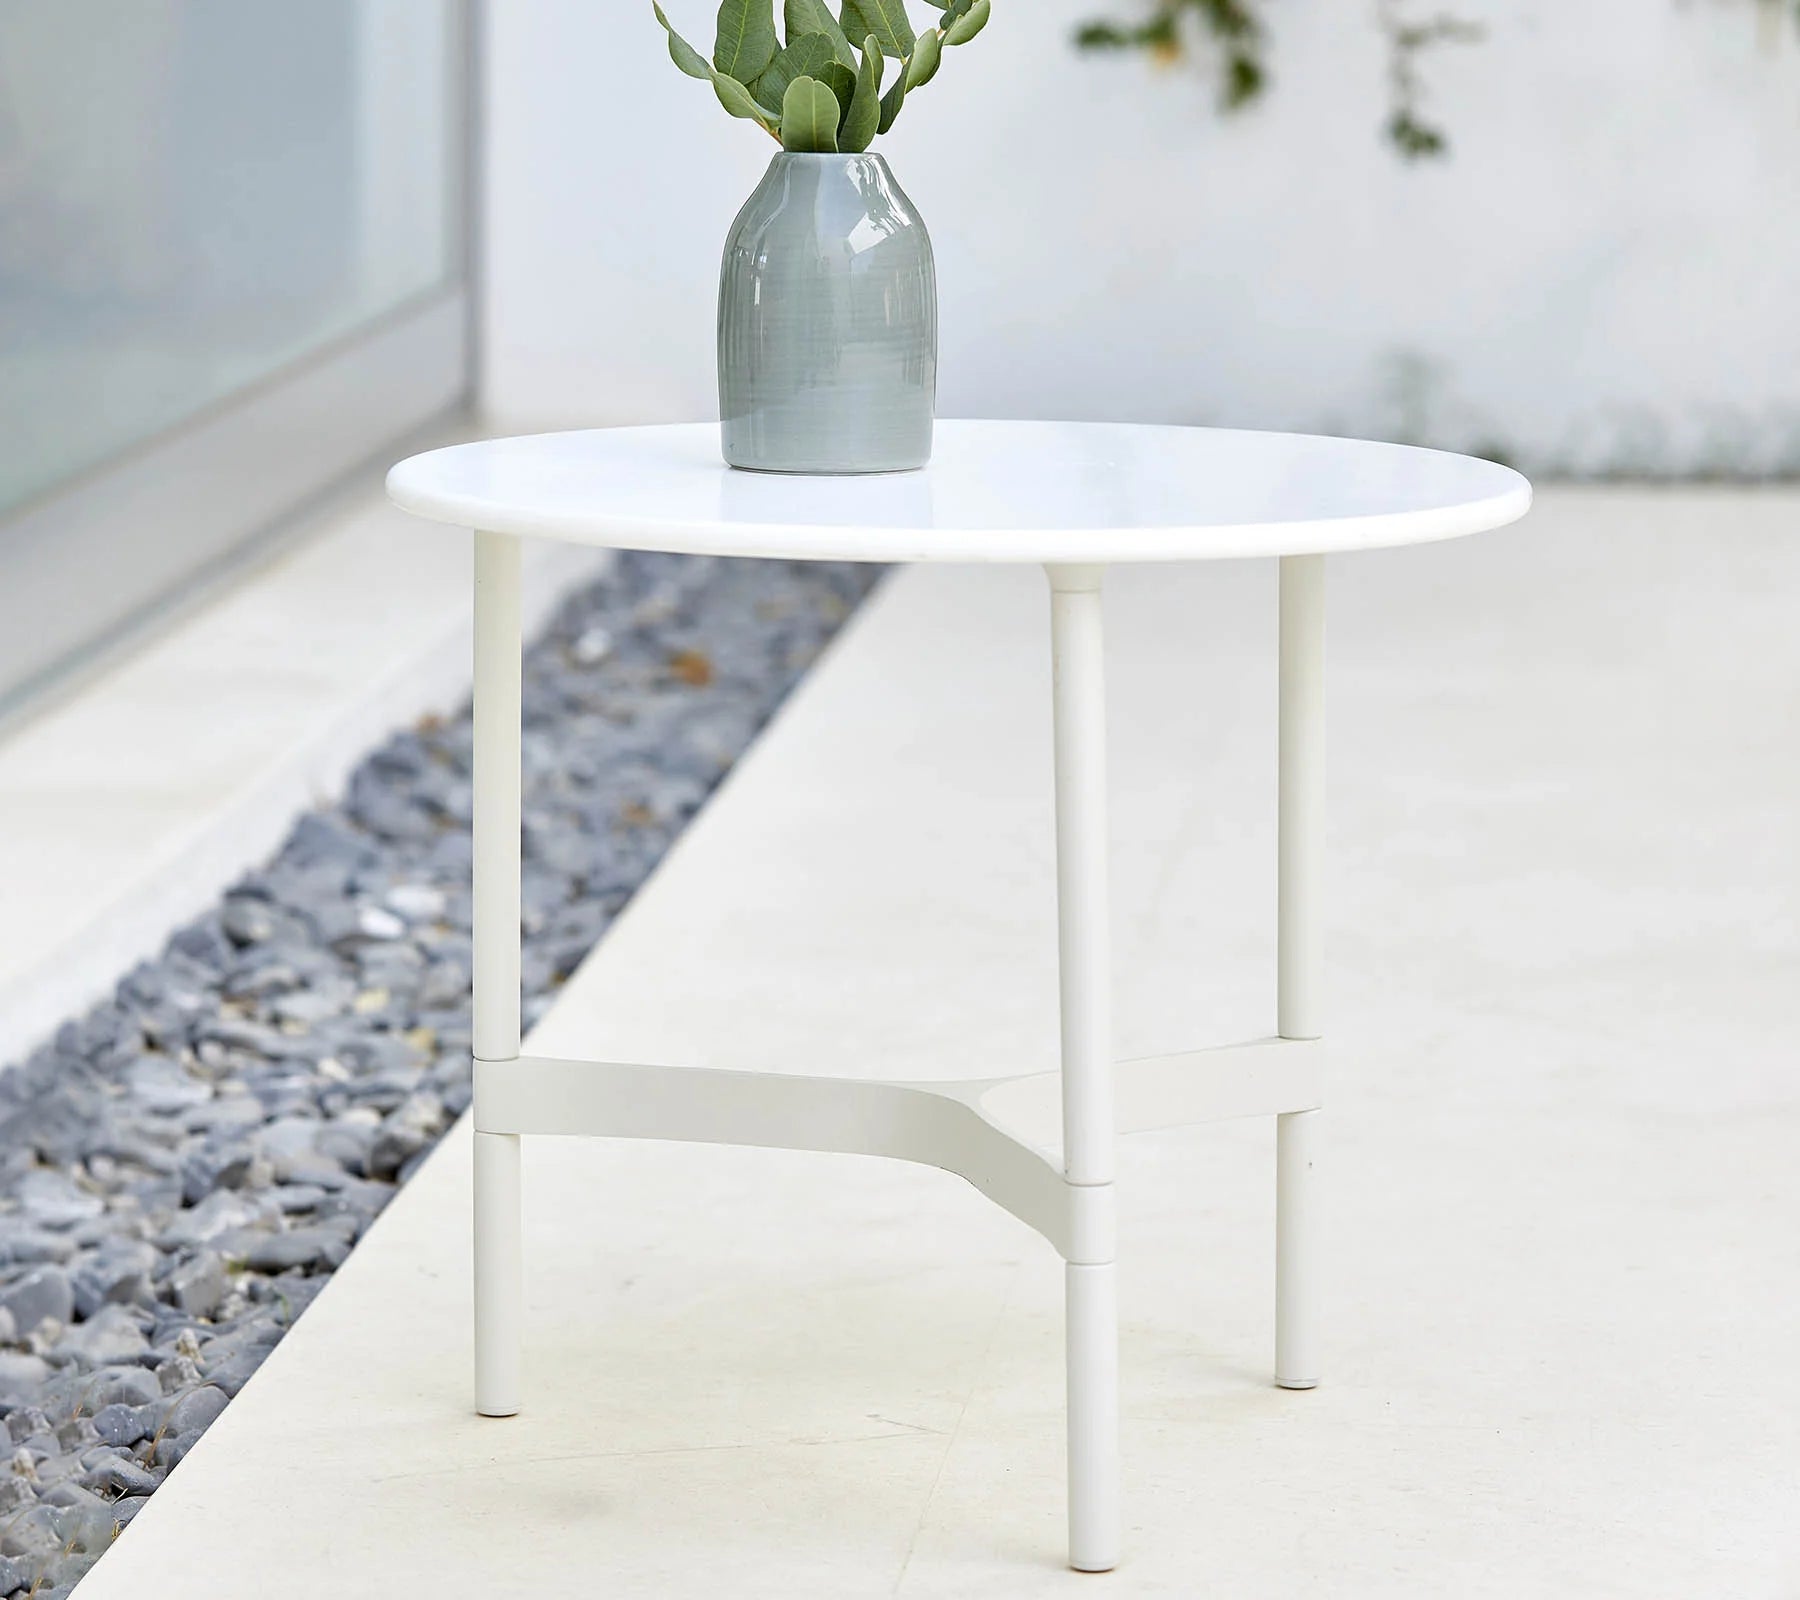  Boxhill's Twist white outdoor round coffee table with plants in a grey vase on it